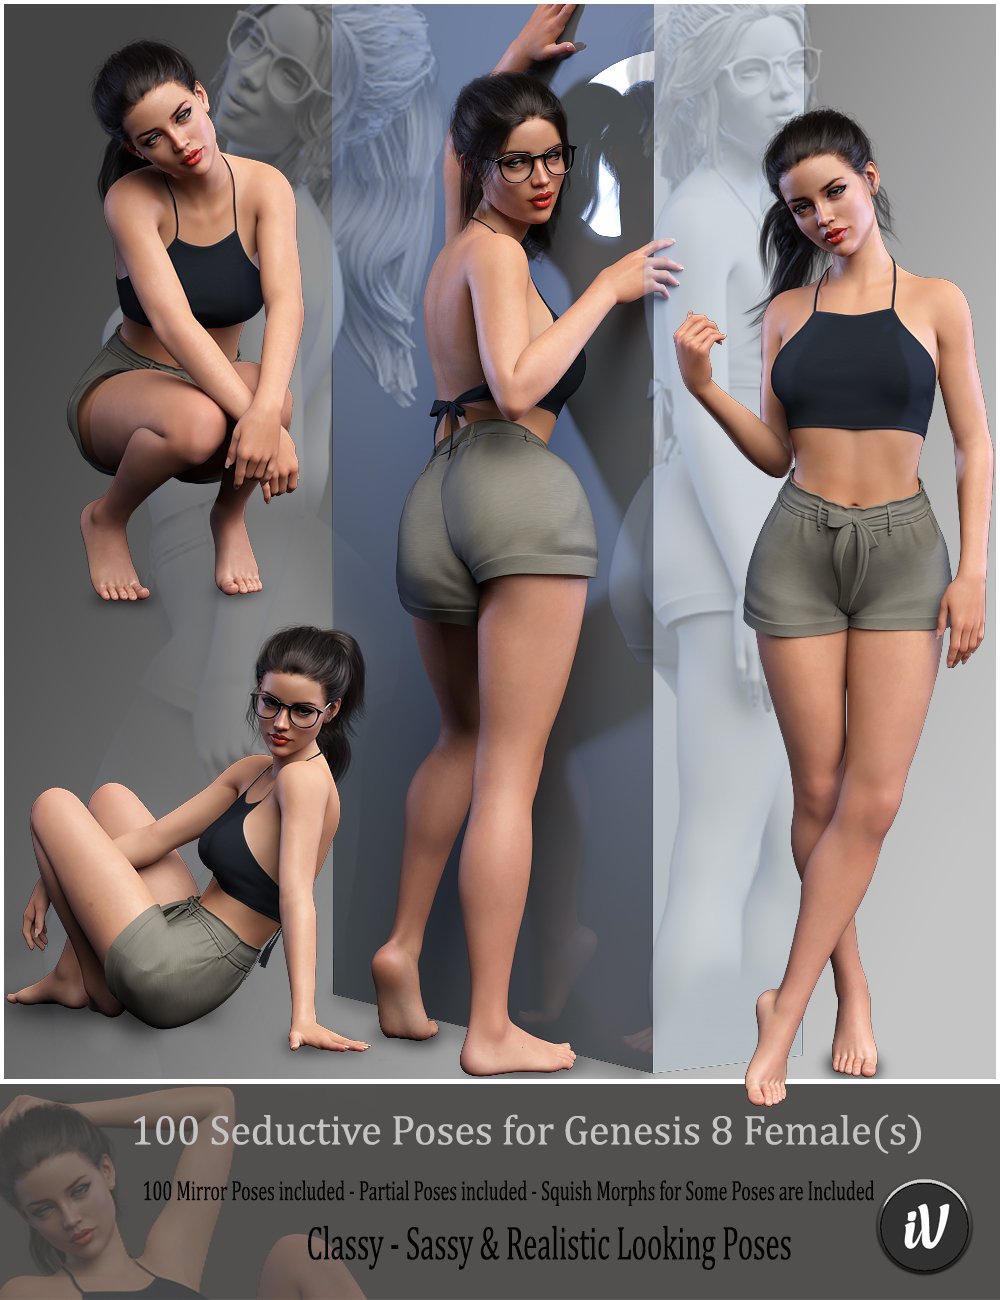 iV 100 Seductive Poses for Genesis 8 Female(s) by: i3D_LotusValery3D, 3D Models by Daz 3D